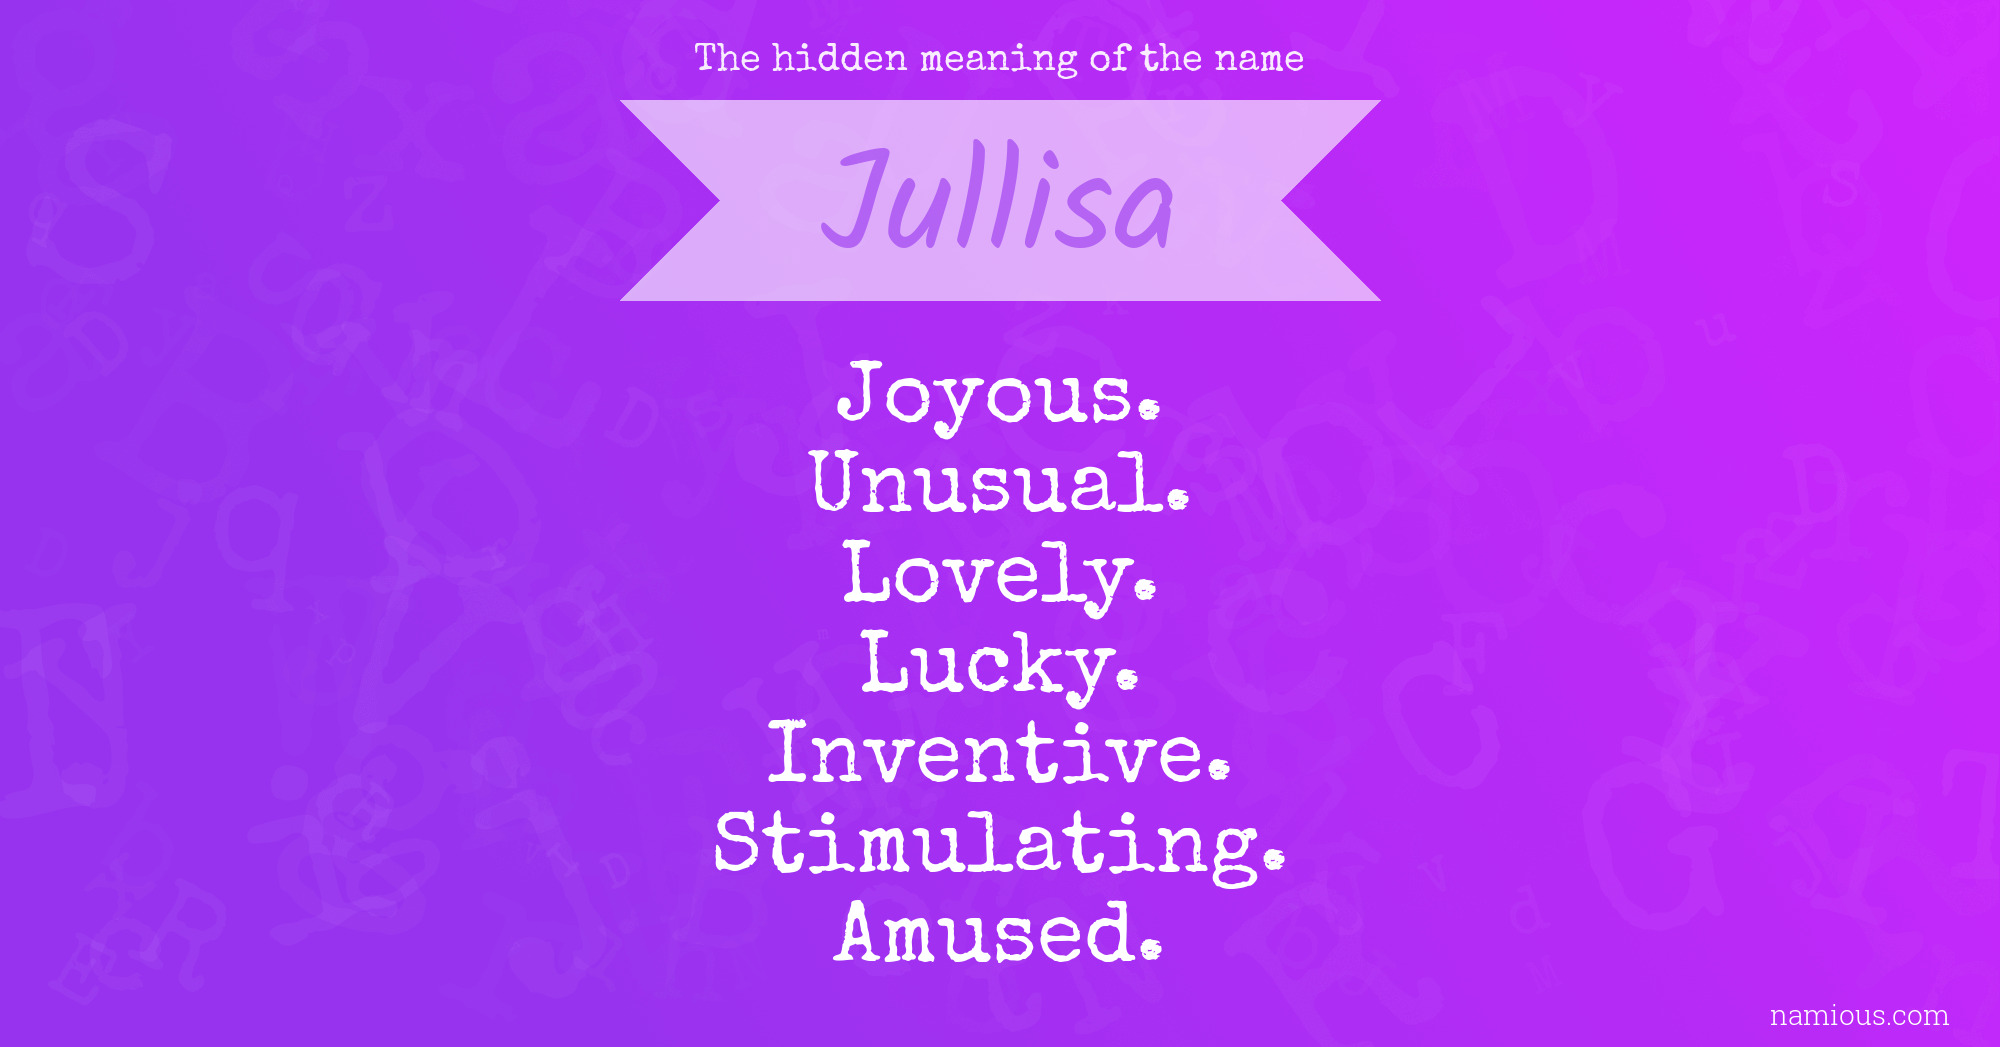 The hidden meaning of the name Jullisa